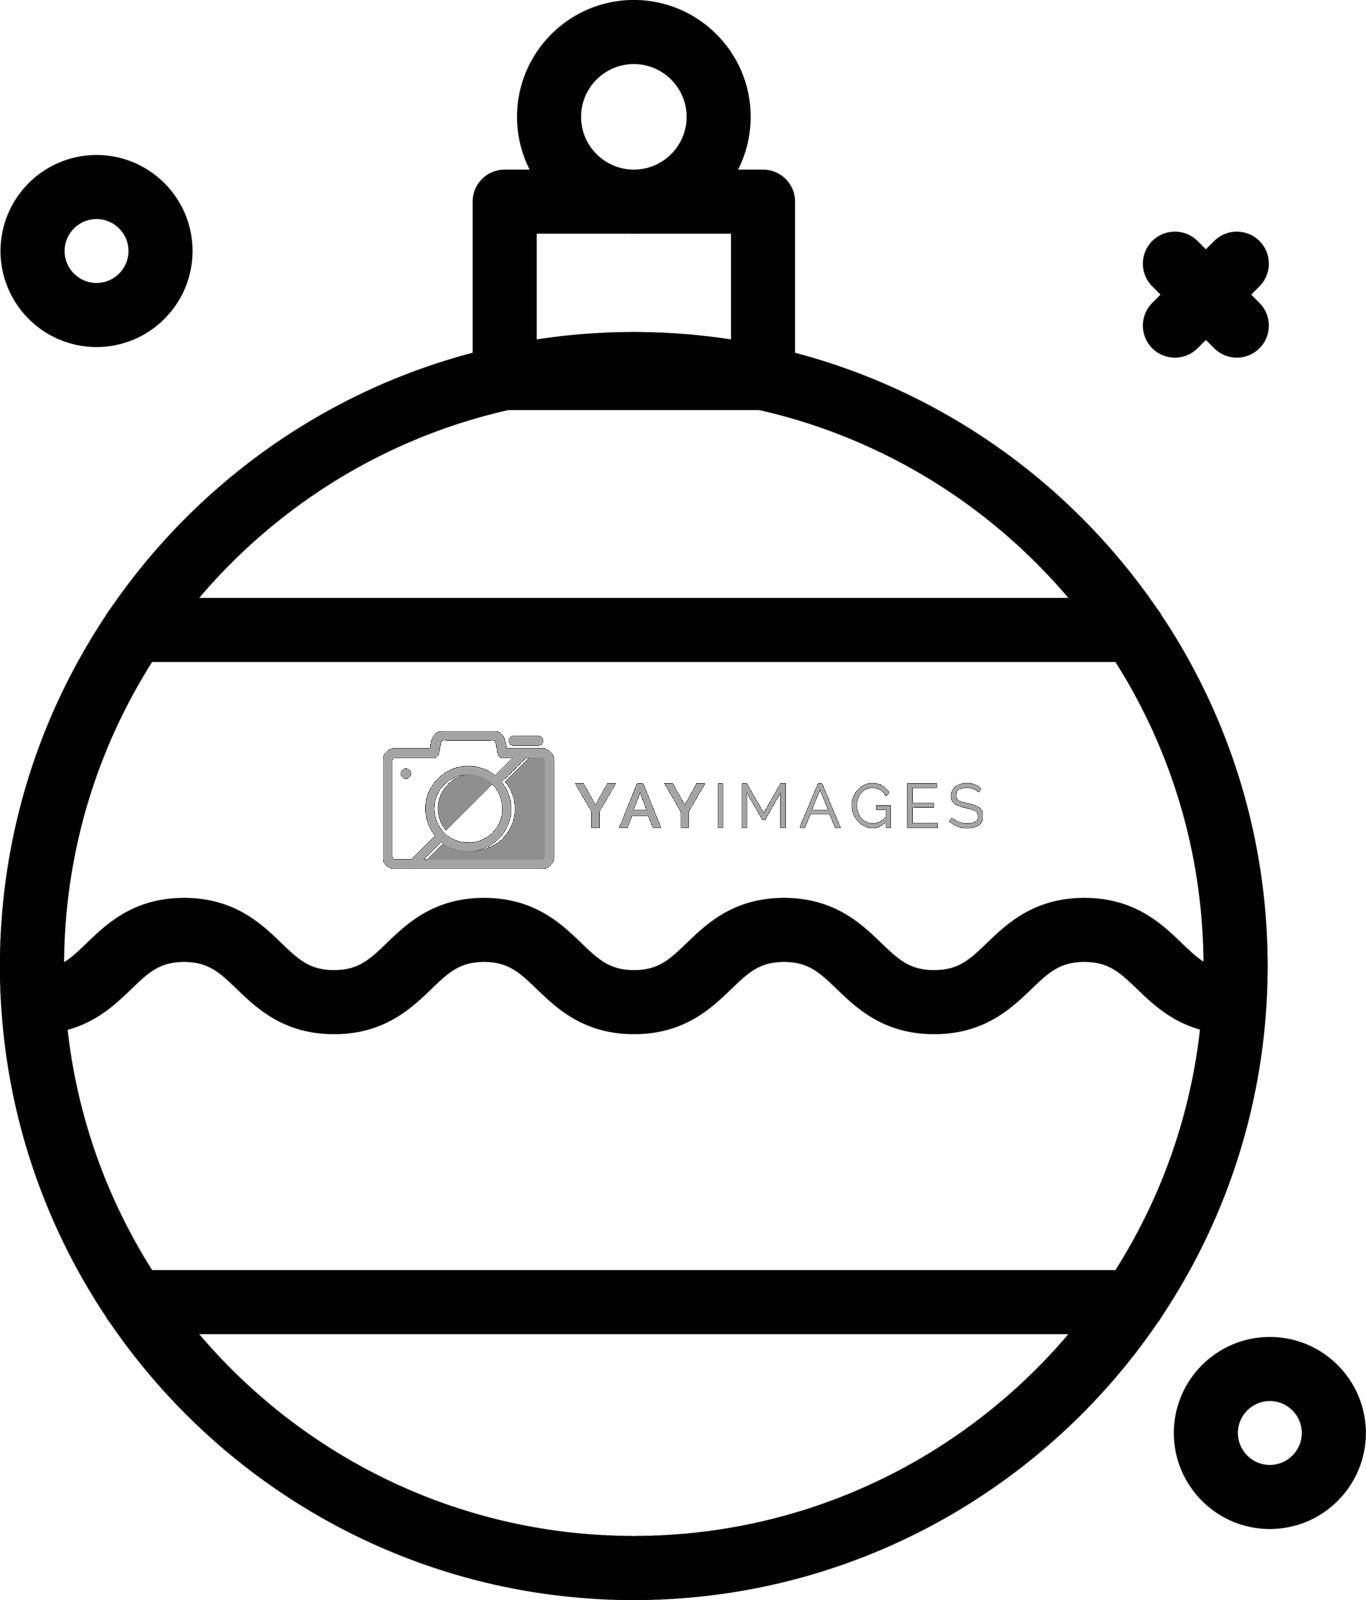 Royalty free image of ornament by FlaticonsDesign